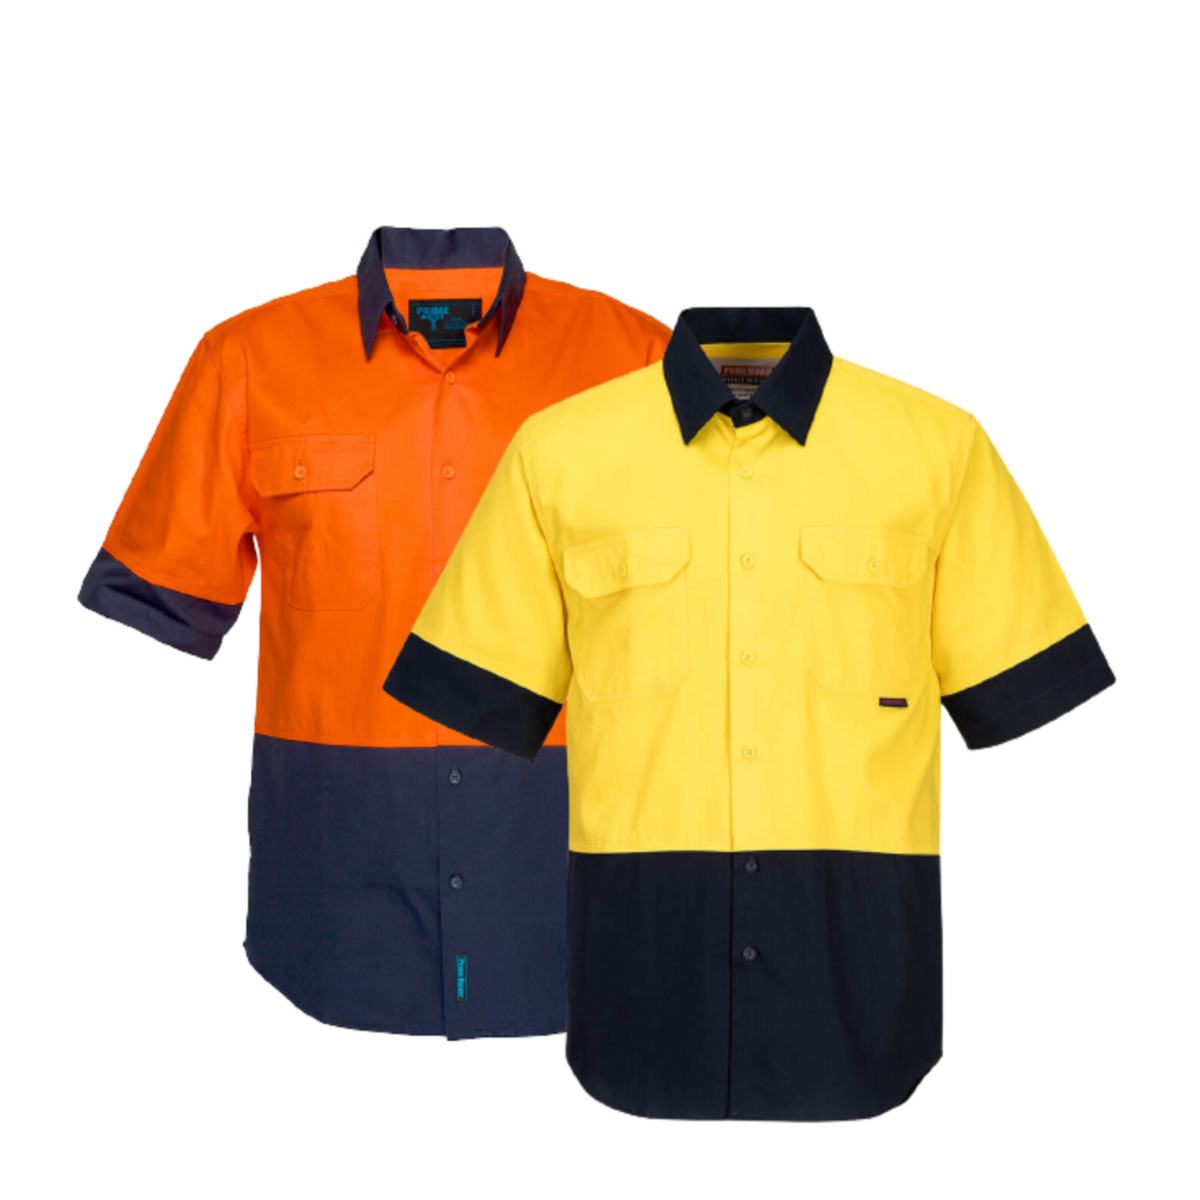 Portwest Hi-Vis Two Tone Regular Weight Short Sleeve Shirt Work Safety MS902-Collins Clothing Co